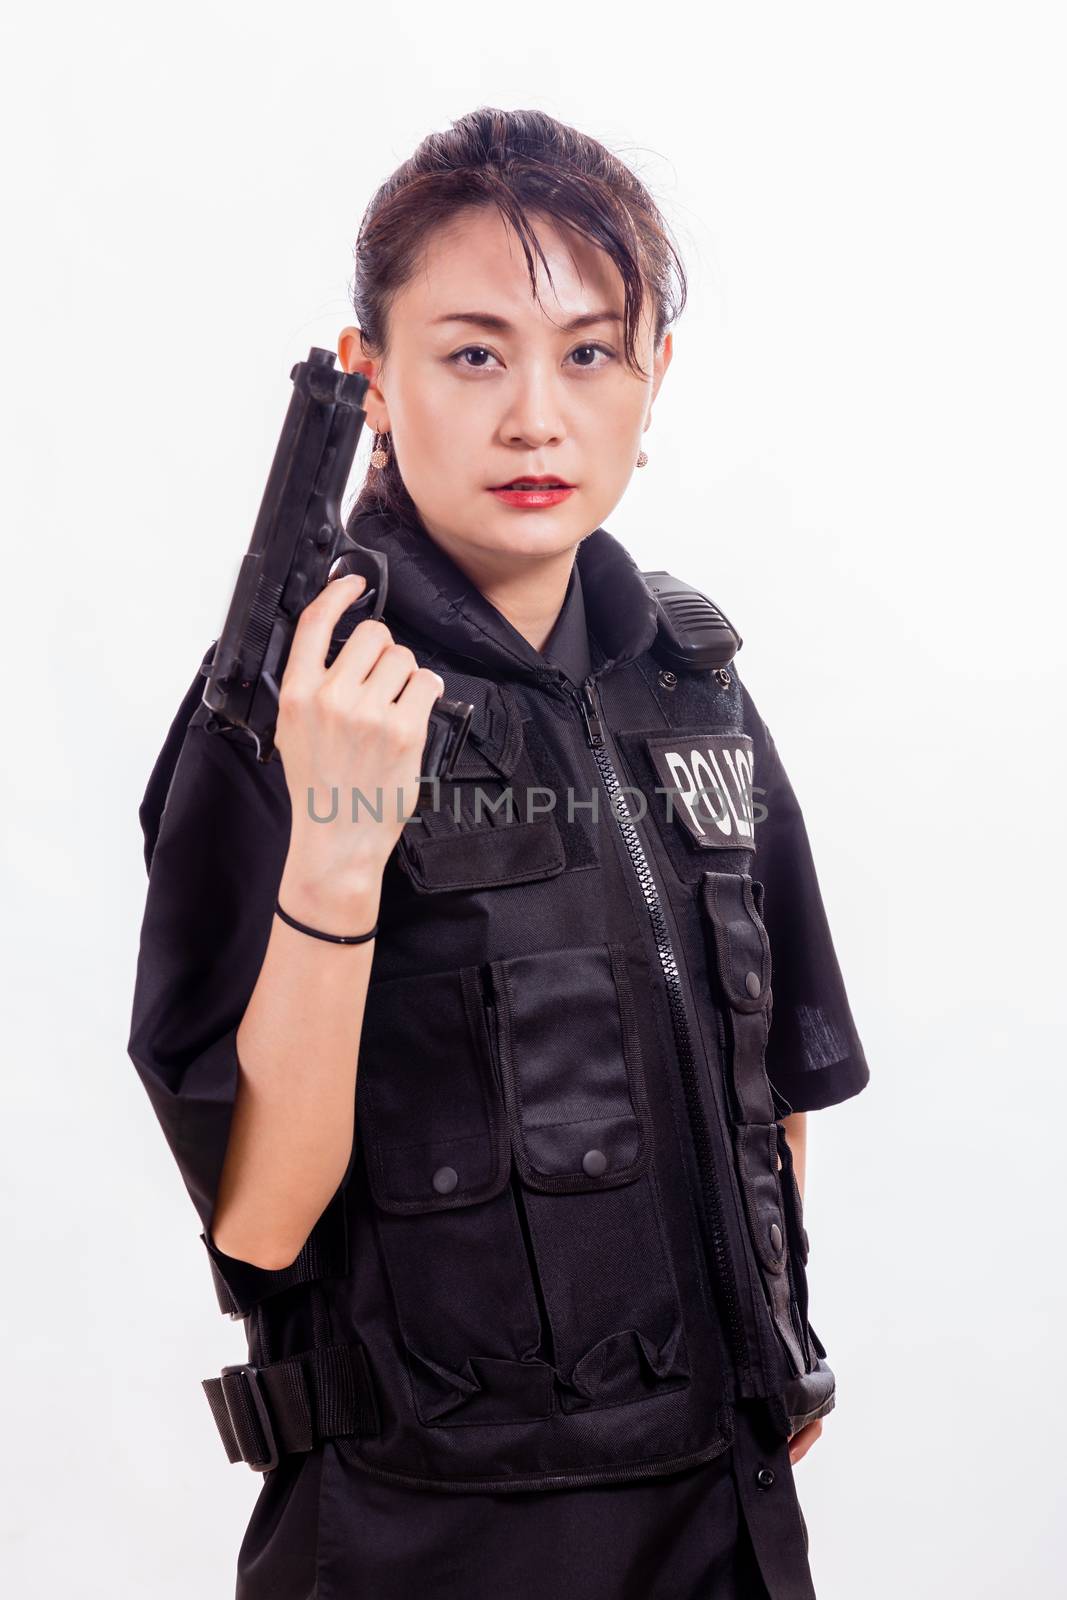 Chinese female police officer with handgun